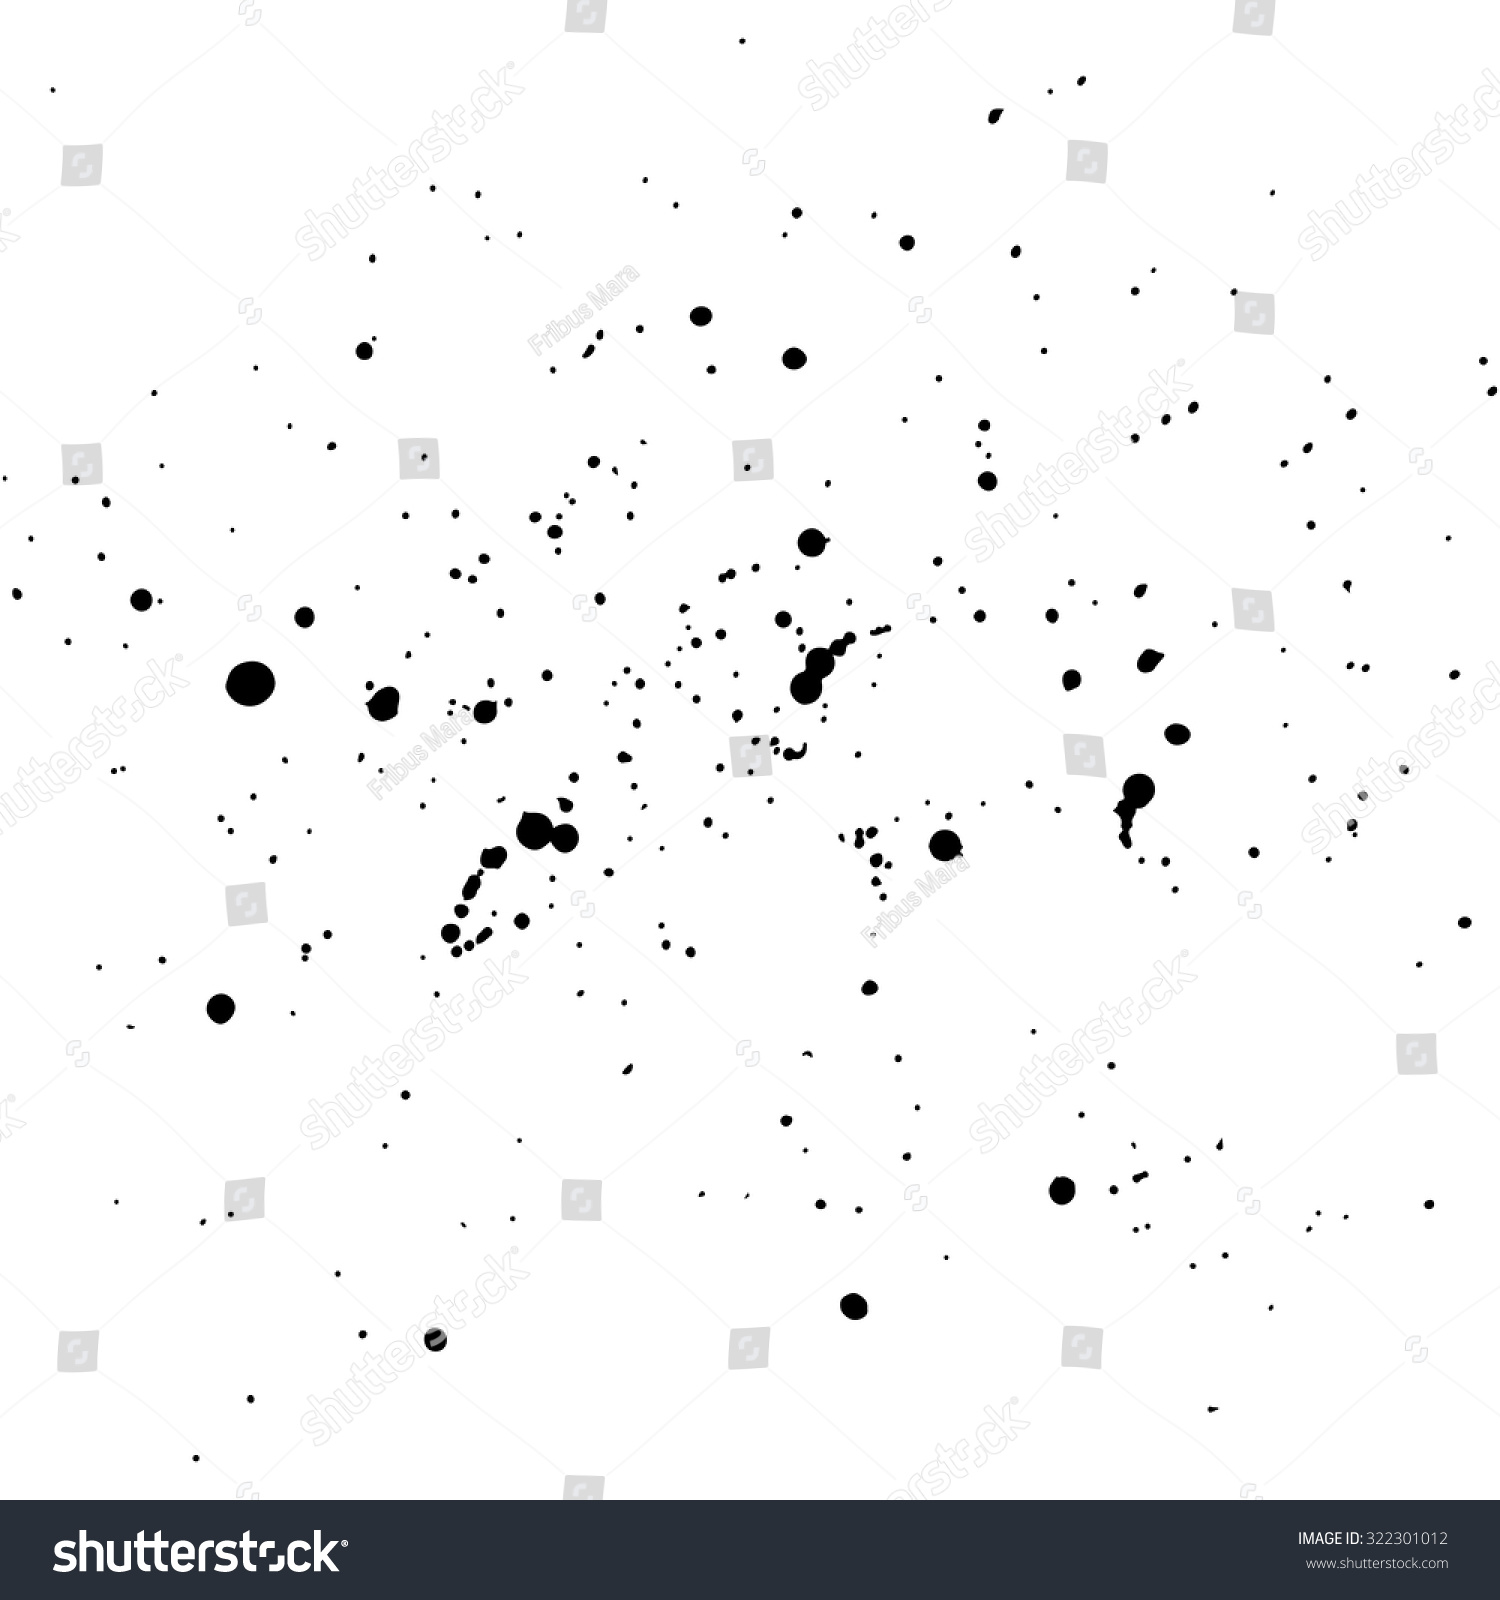 Abstract artistic paint splashes and blots in black and white. Ink splashes background. Black and white texture. #322301012